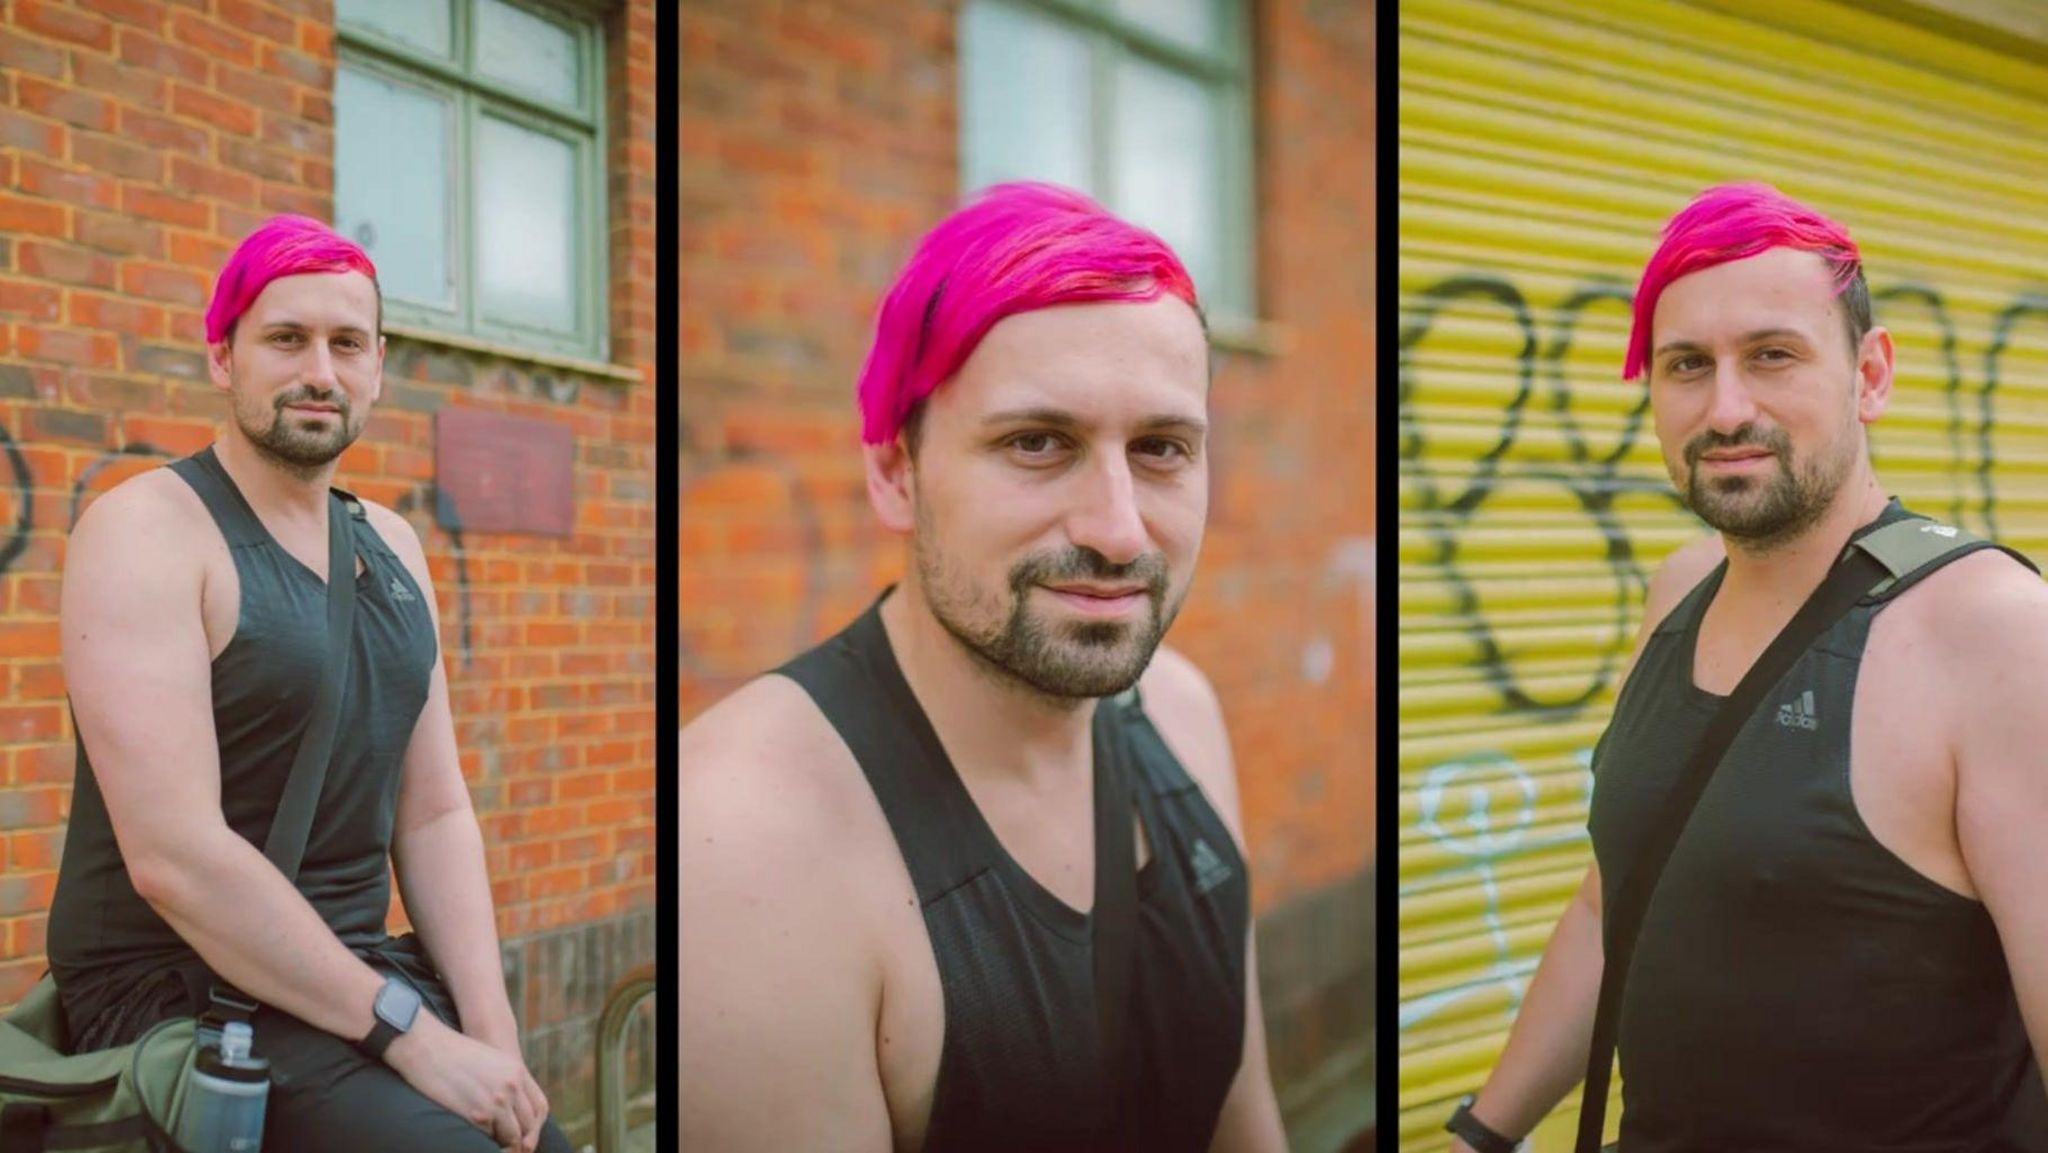 Images of man with pink hair standing beside a wall in Portsmouth